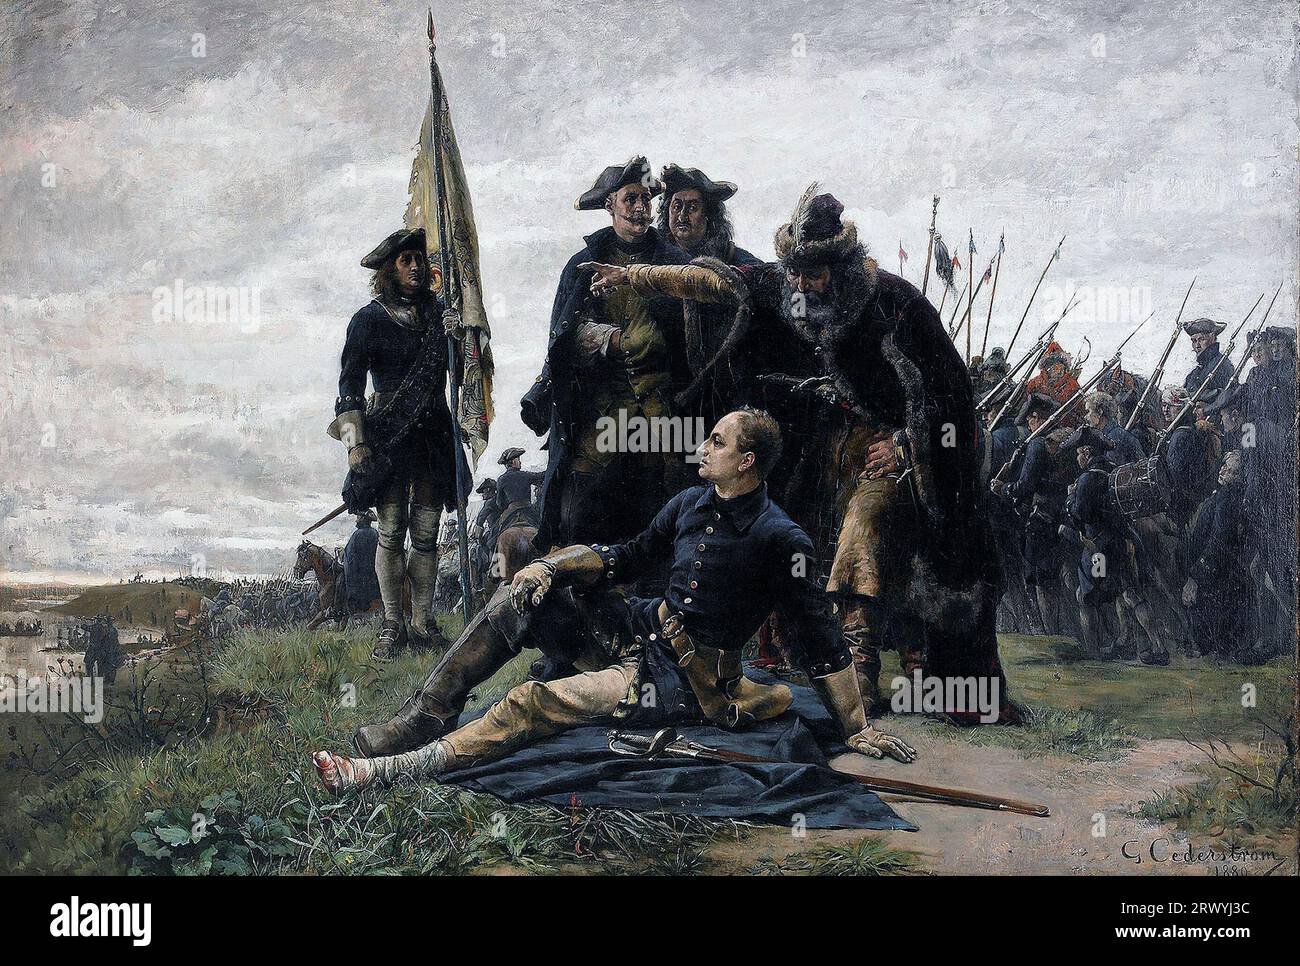 Charles XII and Mazepa at the Dnieper River after Poltava, Painting by Gustaf Cederström Stock Photo